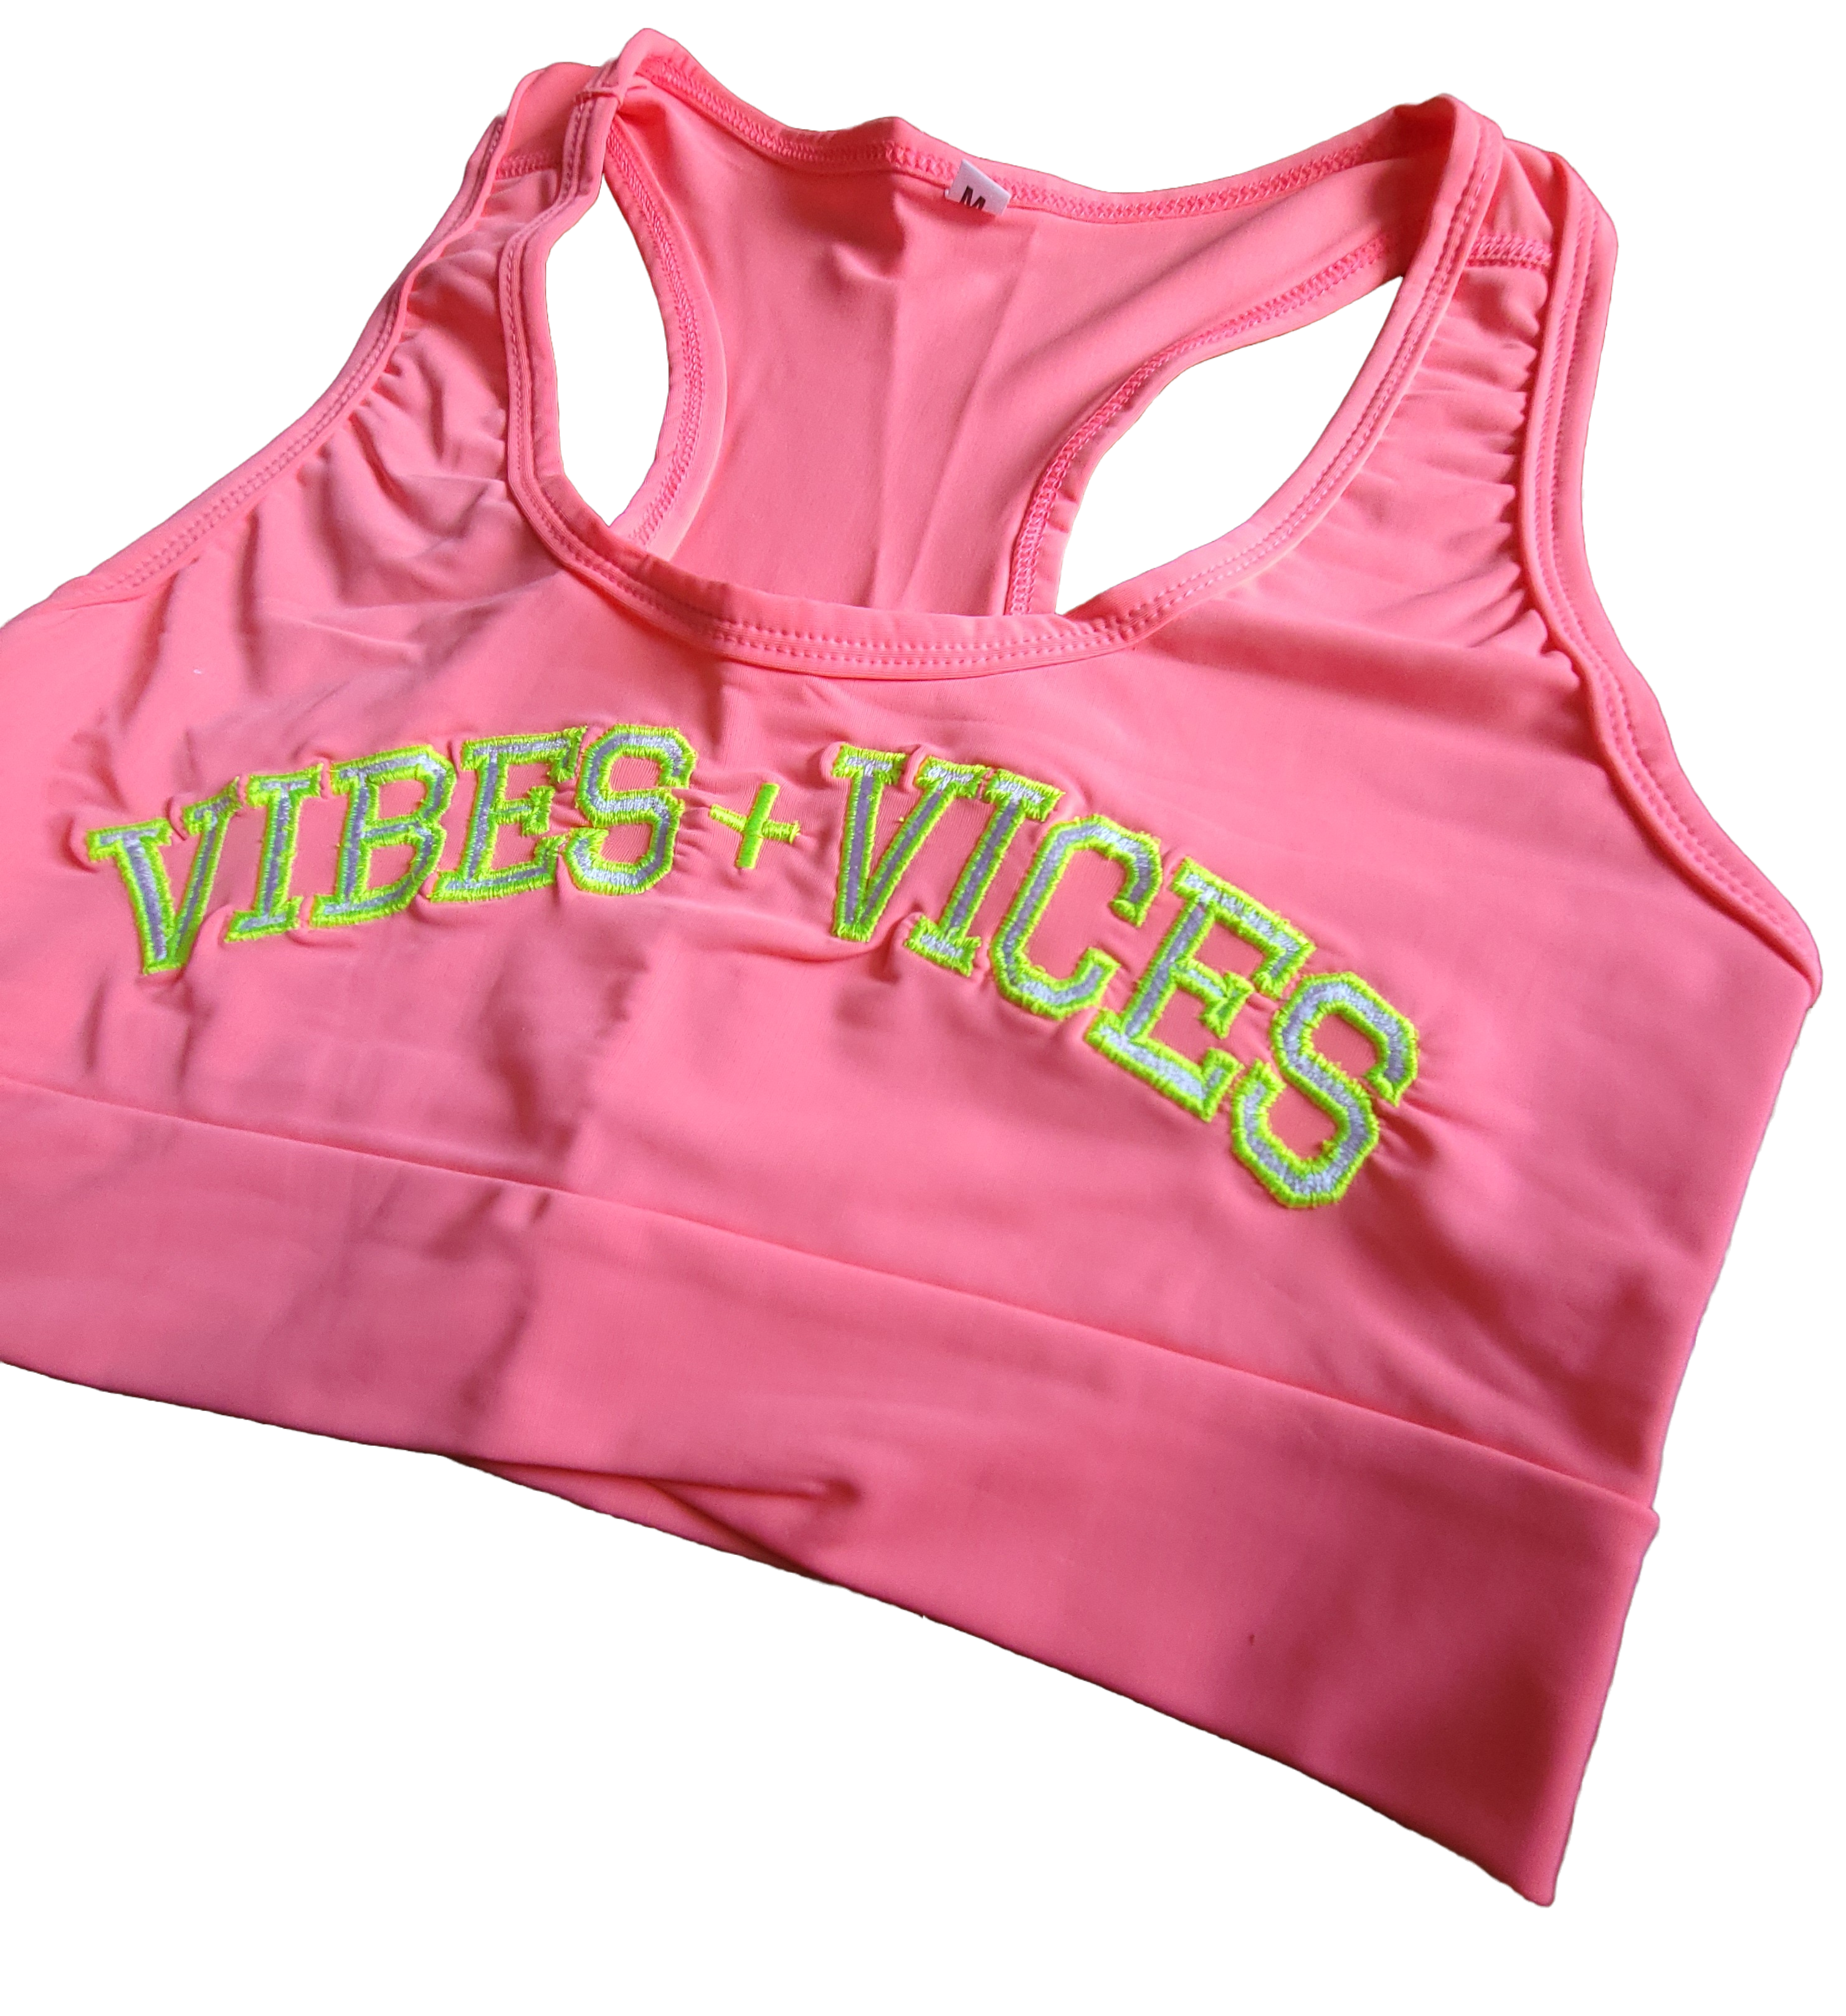 Vibes and Vices Sports Bra Sports Bra Small / Pink/Neon,Medium / Pink/Neon,Large / Pink/Neon,X-Large / Pink/Neon,2X-Large / Pink/Neon,3X-Large / Pink/Neon Pale Violet Red